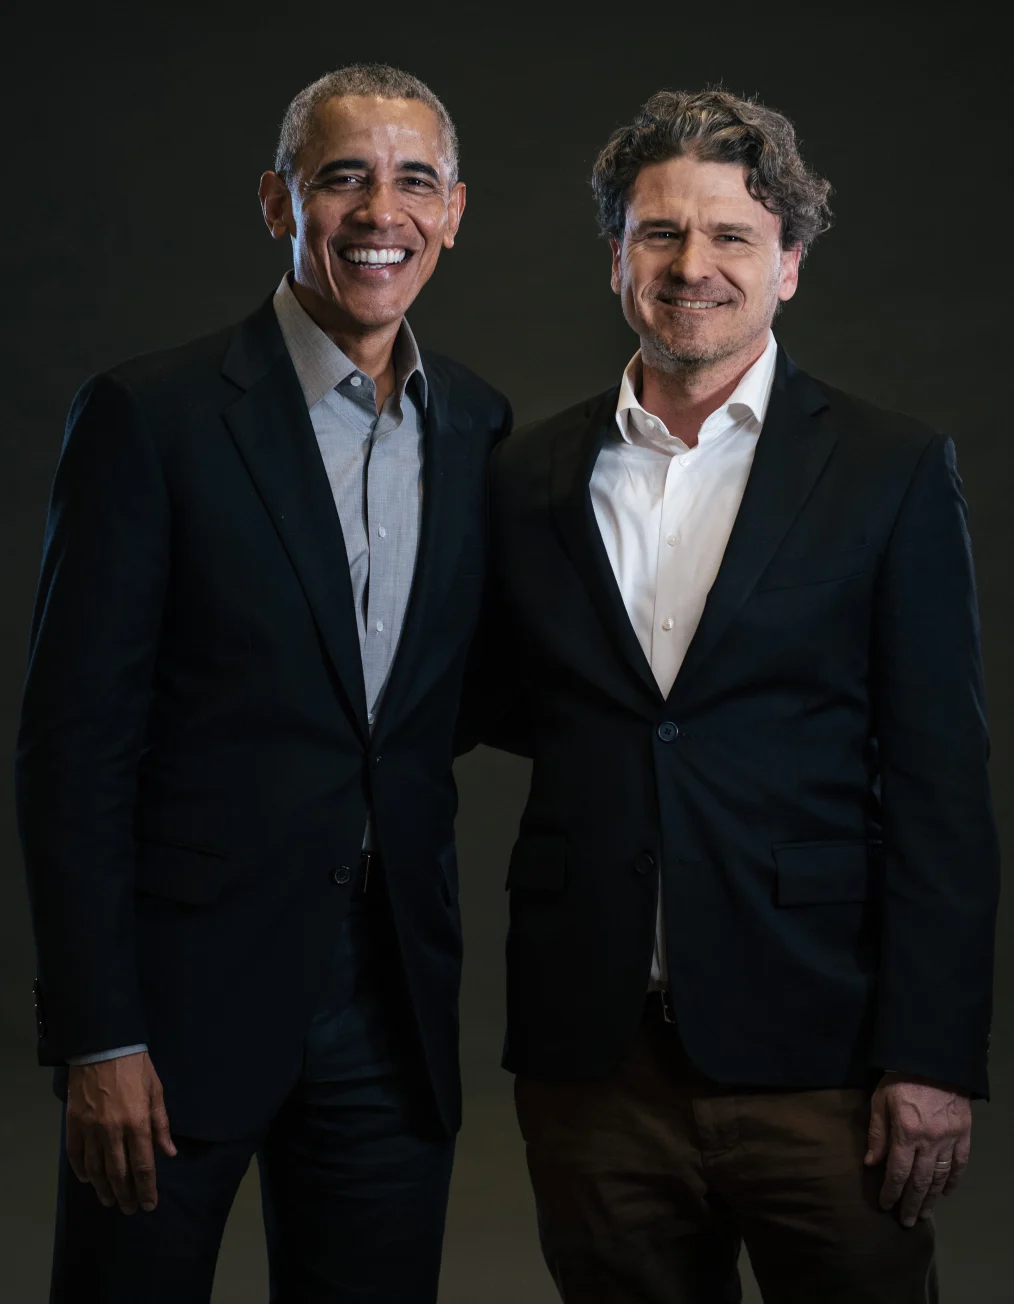 In this picture, President Obama wearing a black suit and gray shirt poses beside
a man with a light skin tone wearing a black suit and a white shirt, while smiling
 at the camera.